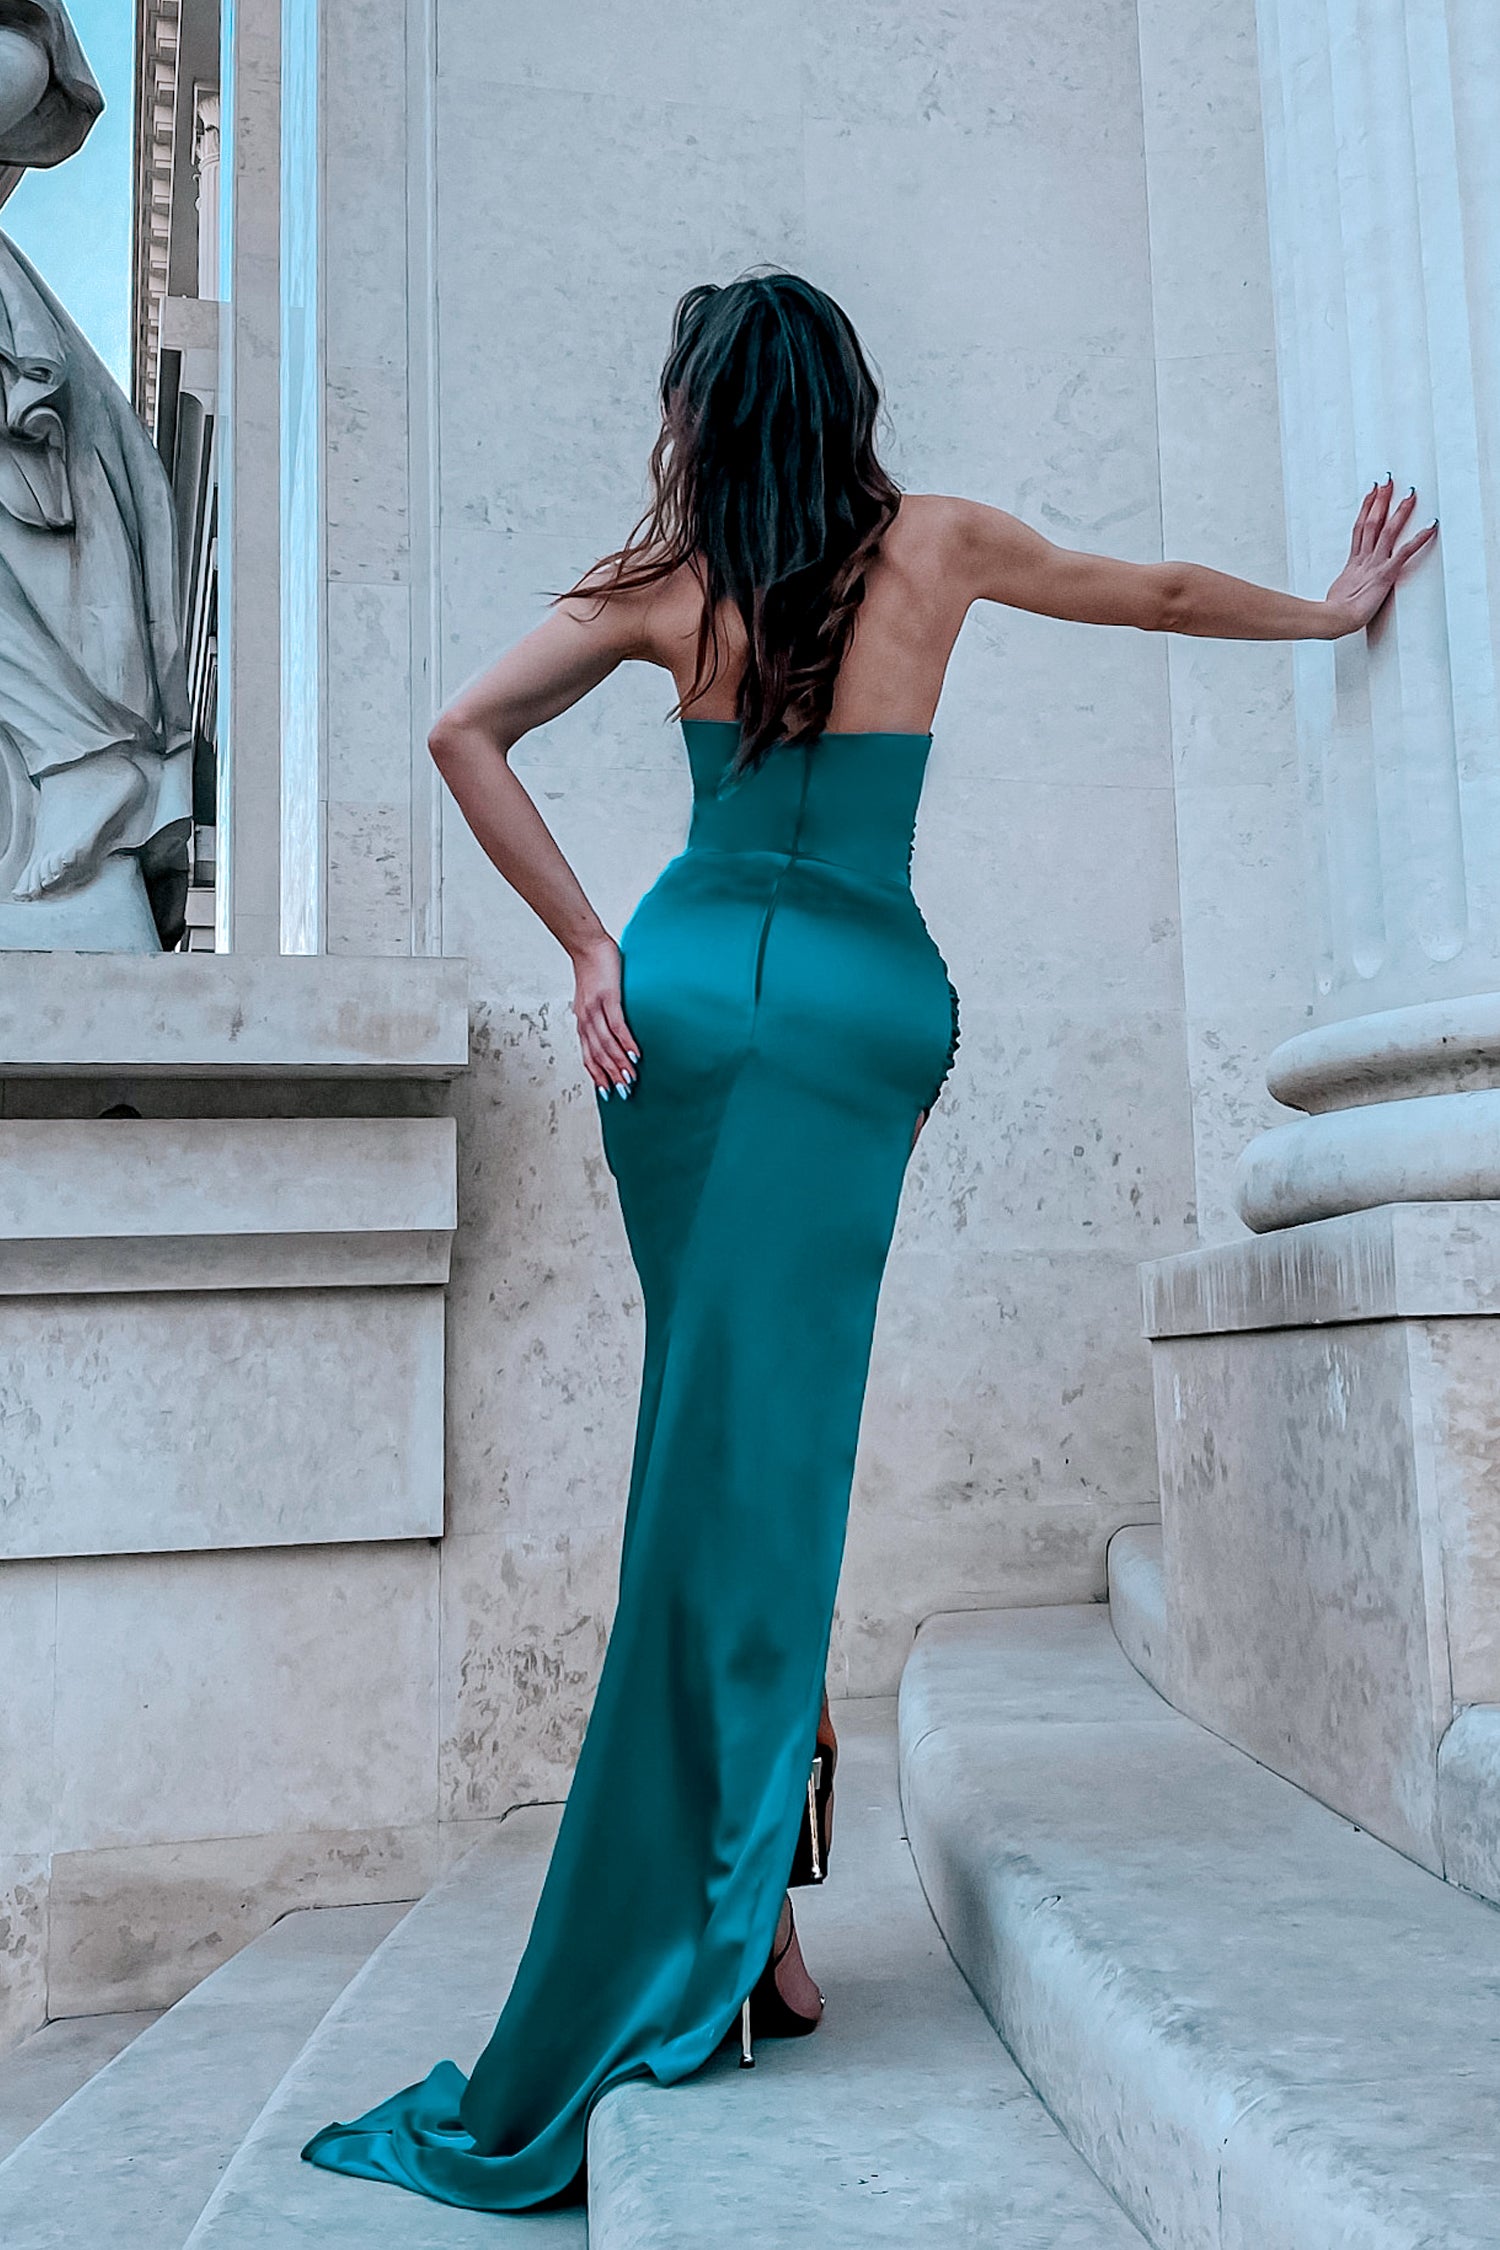 Tina Holly Couture TE345 Teal Silk Satin Asymmetrical Neck Line With A Ruched Side And High Leg Spilt Formal Dress